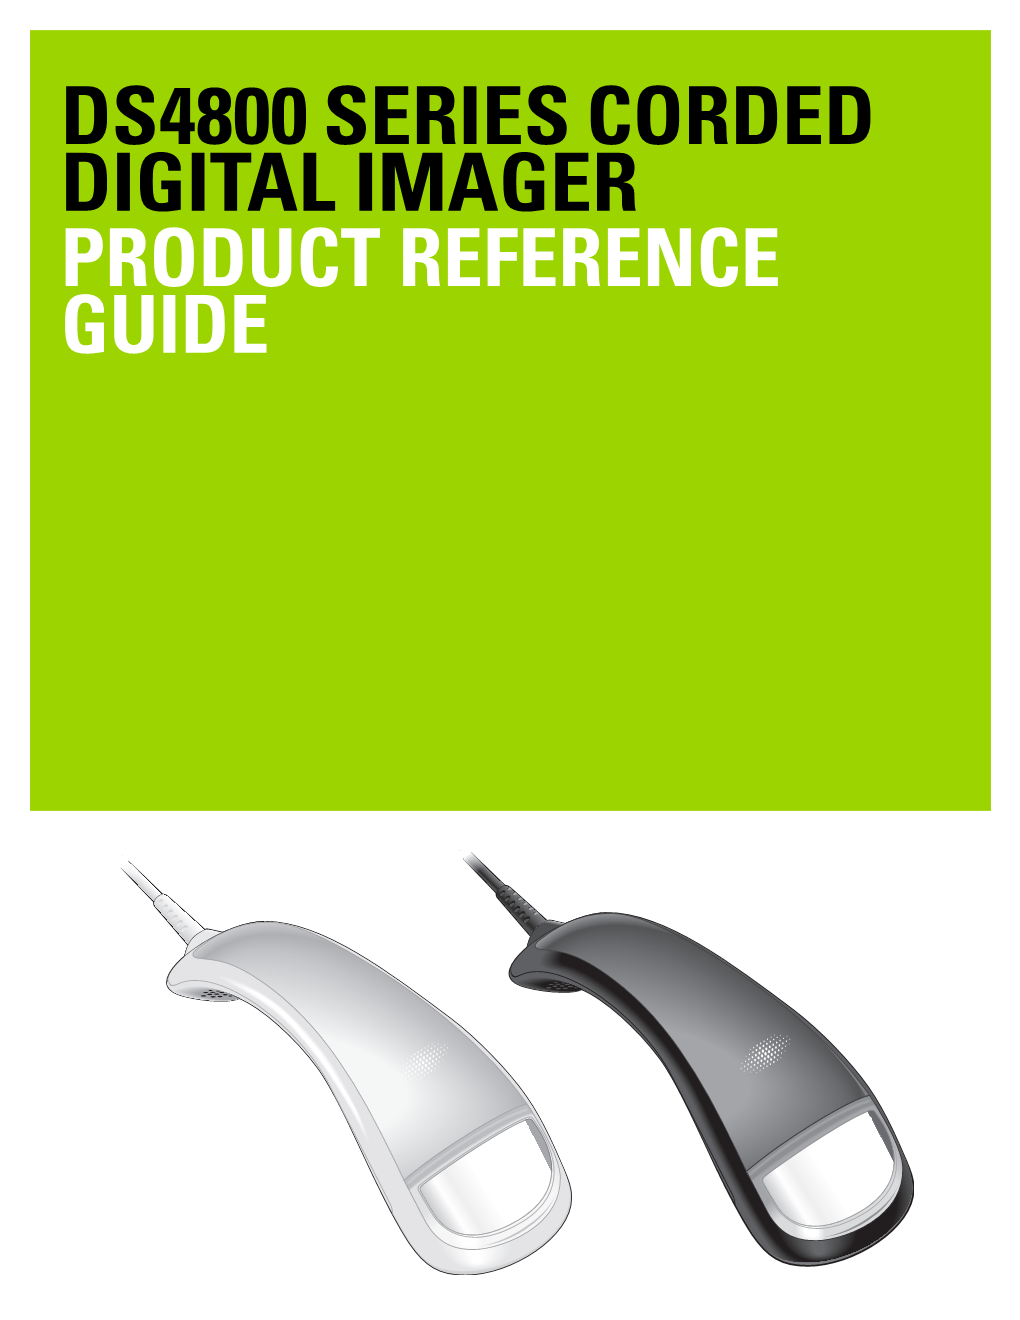 Ds4800 Series Corded Digital Imager Product Reference Guide